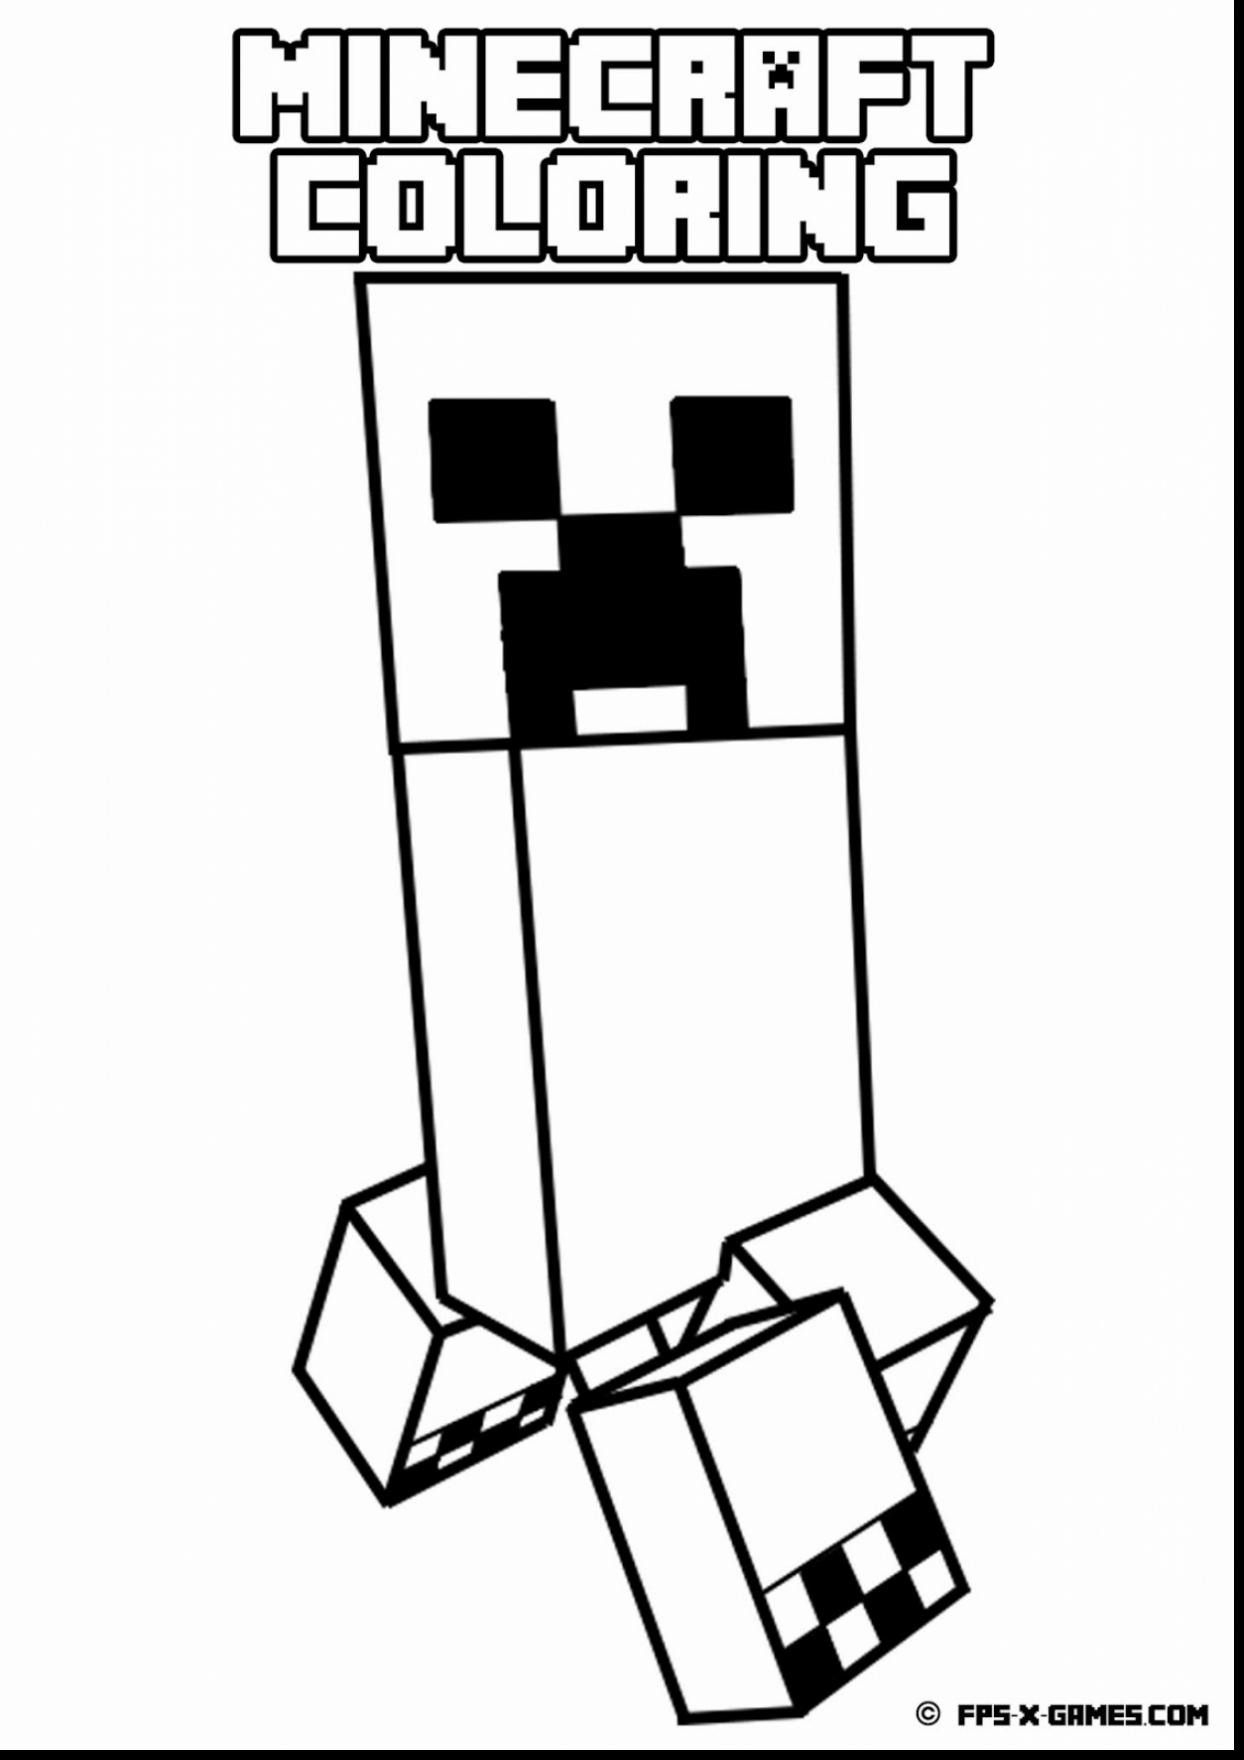 Minecraft Creeper Coloring Pages Printable At Getdrawings | Free Download pour Dessin Creeper Minecraft